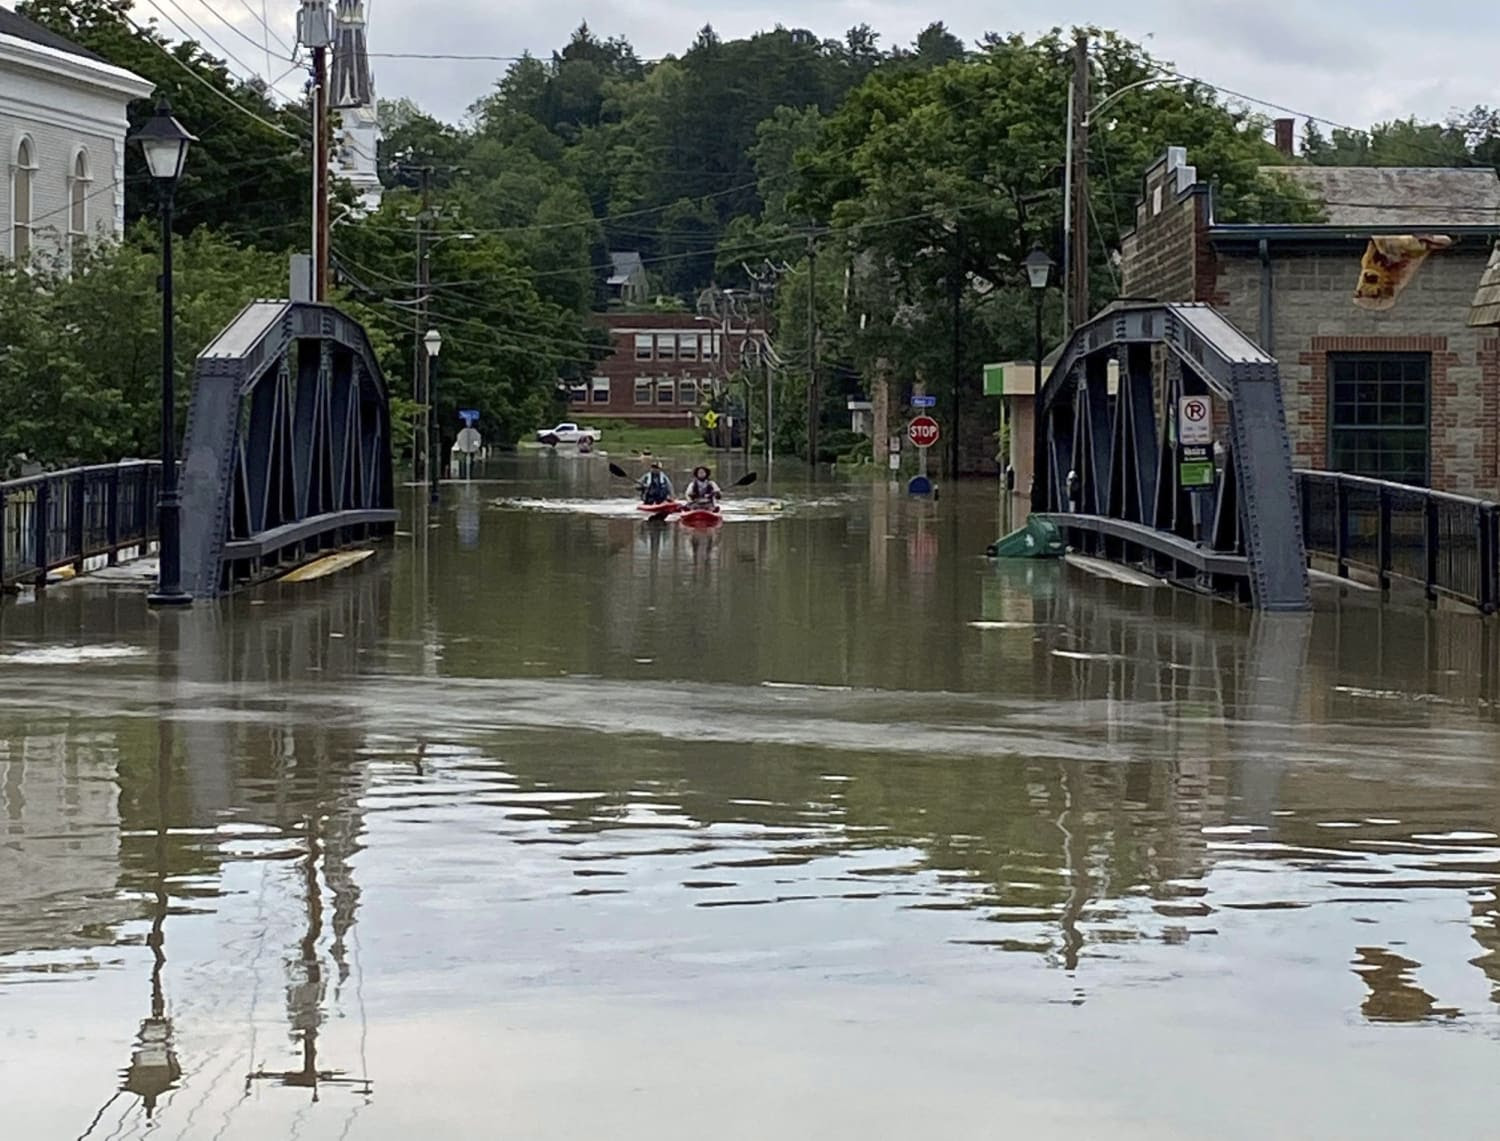 Extreme heat continues to bake the Southwest, while Vermont recovers from massive flooding 230711-vermont-flooding-montpelier-mn-1315-a2cdd8